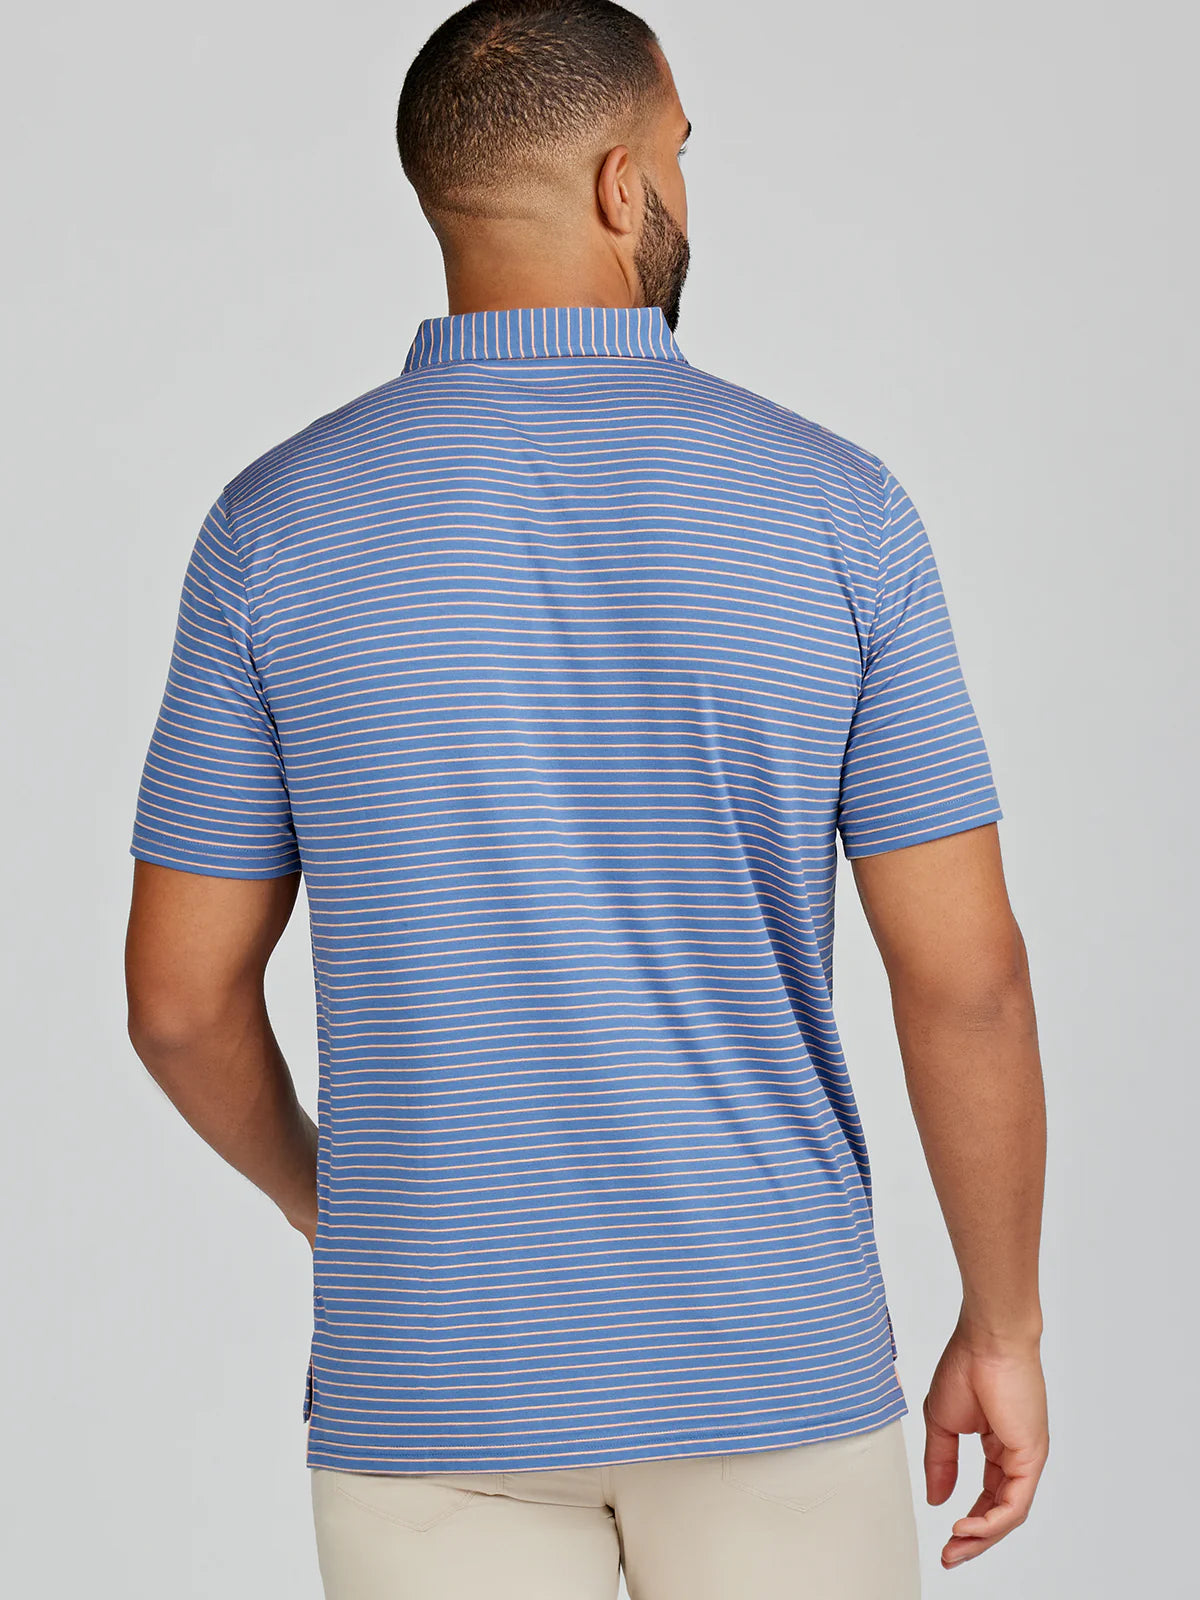 Back view of the Cloud Lightweight Polo Brookline Stripe by Tasc Performance